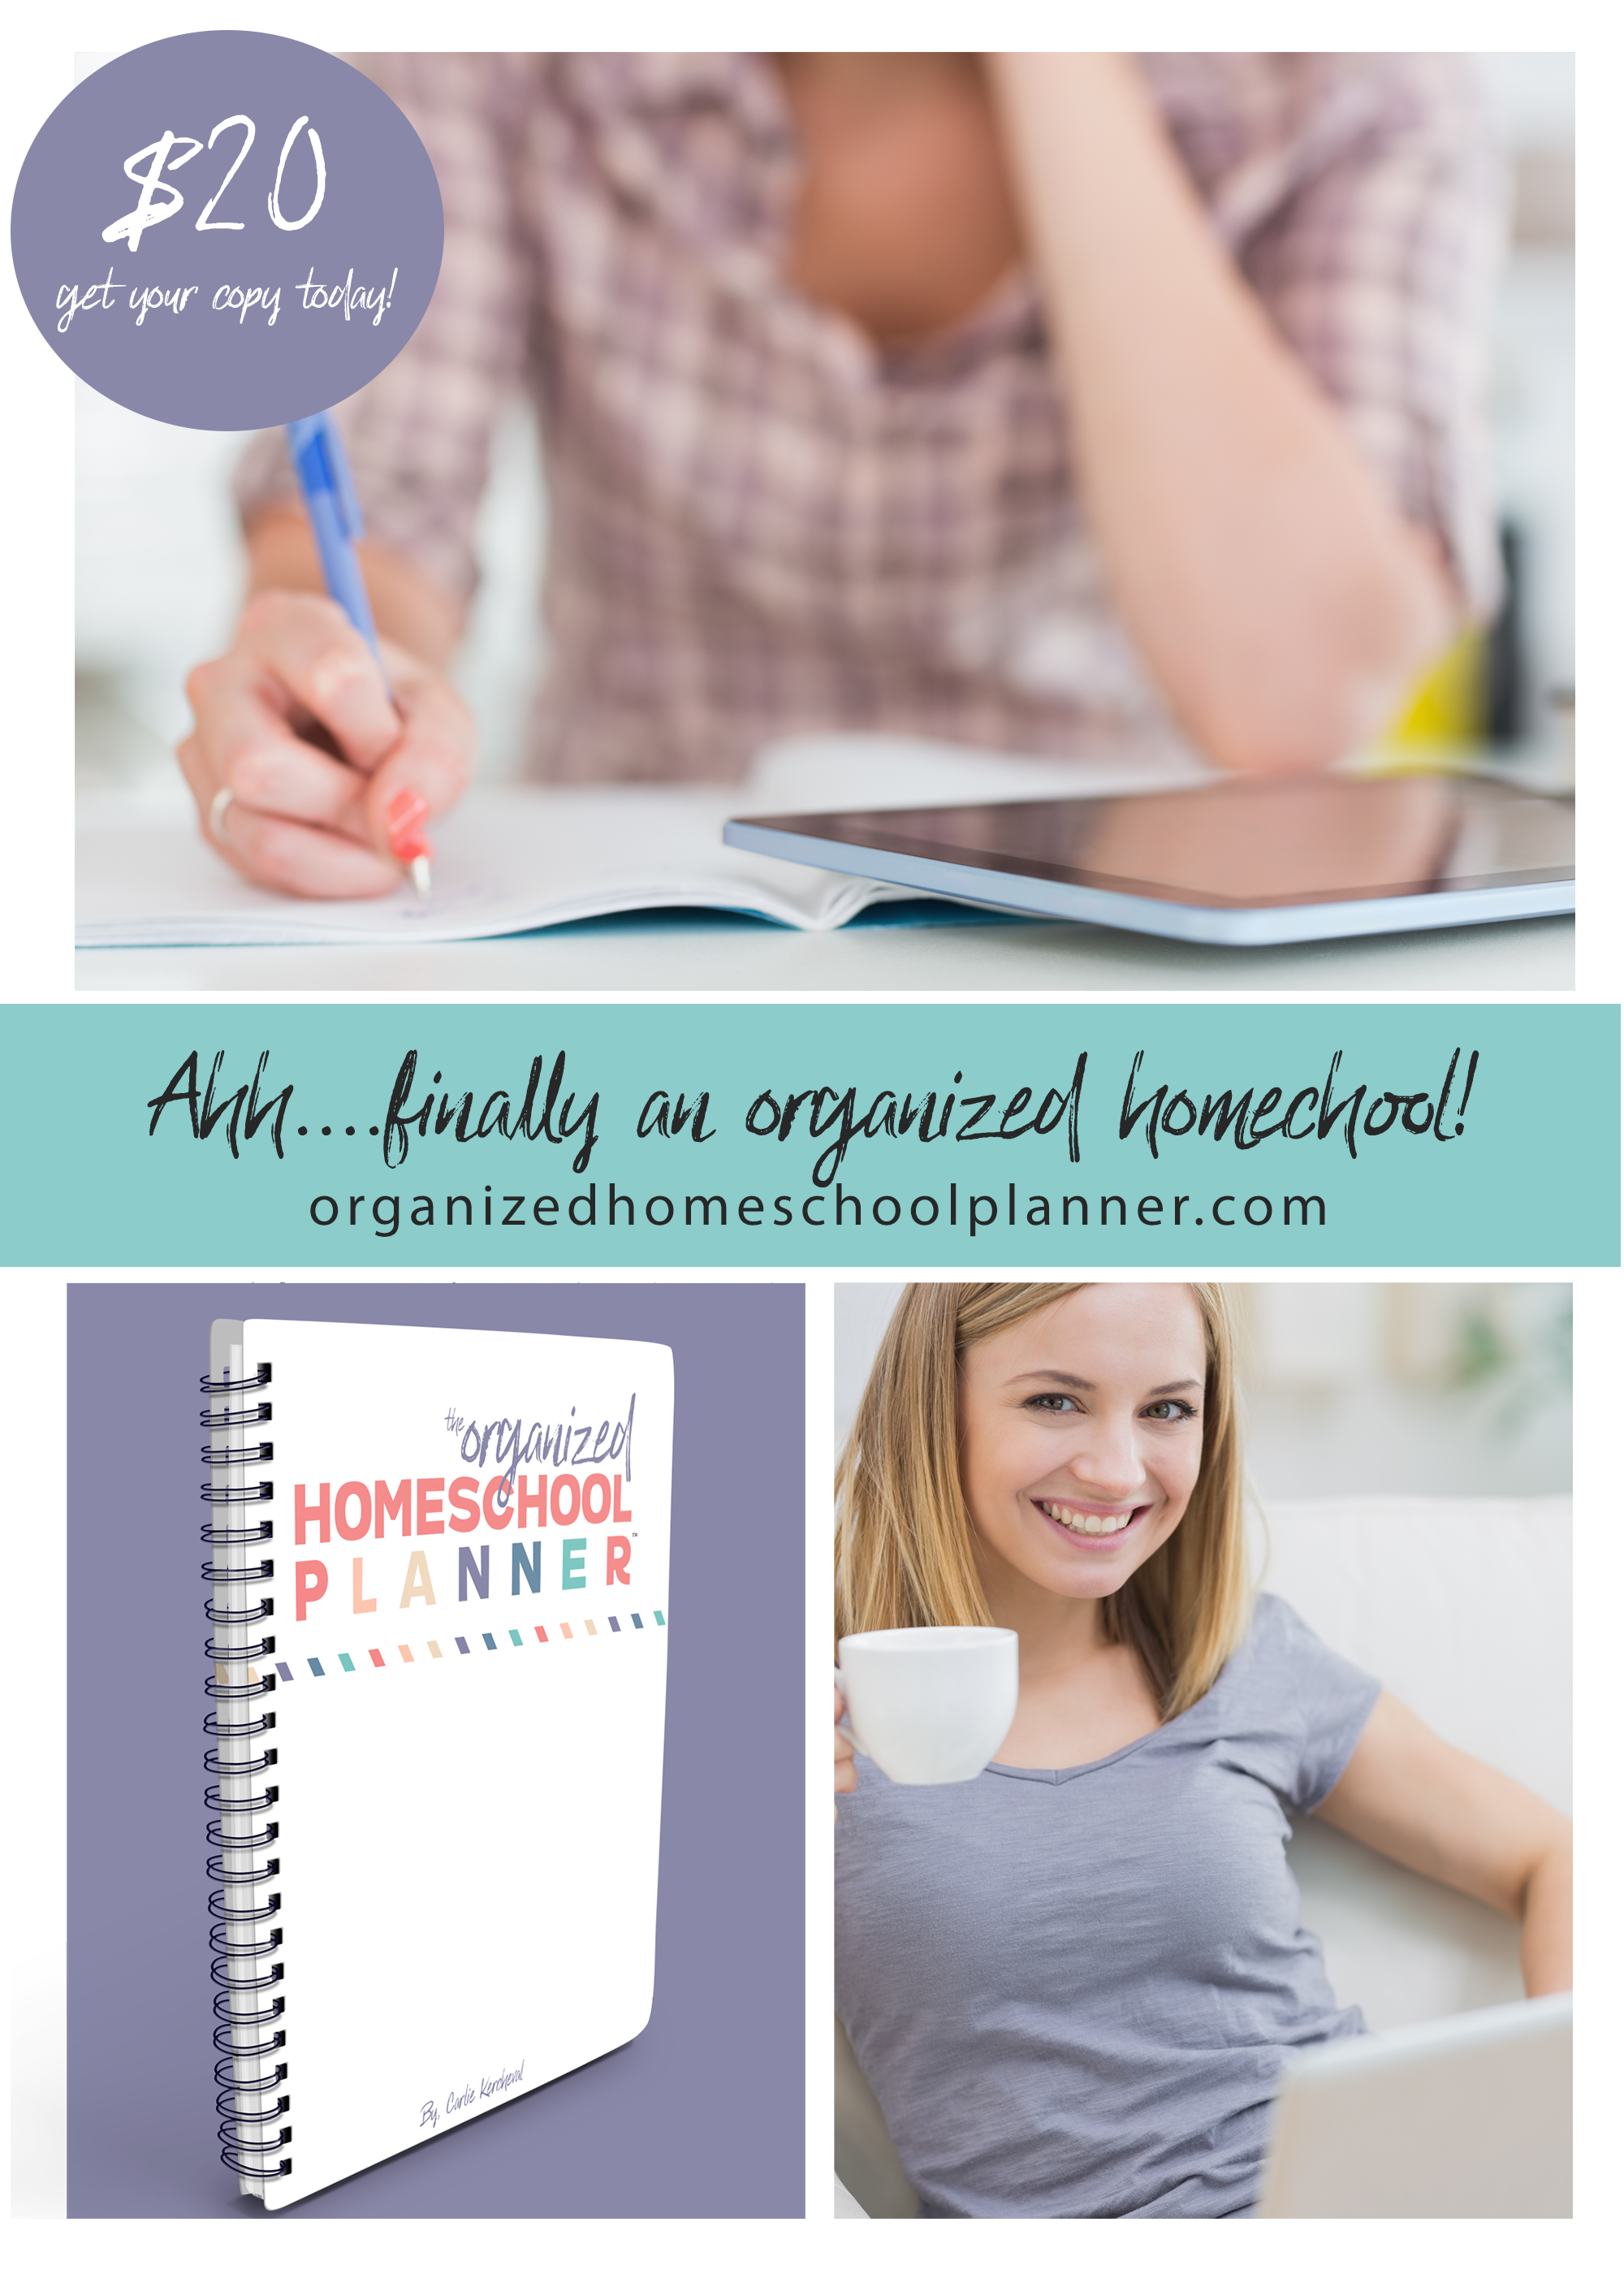 Looking to get your homeschool organized without a huge paper trail? The Organized Homeschool Planner™ can help!